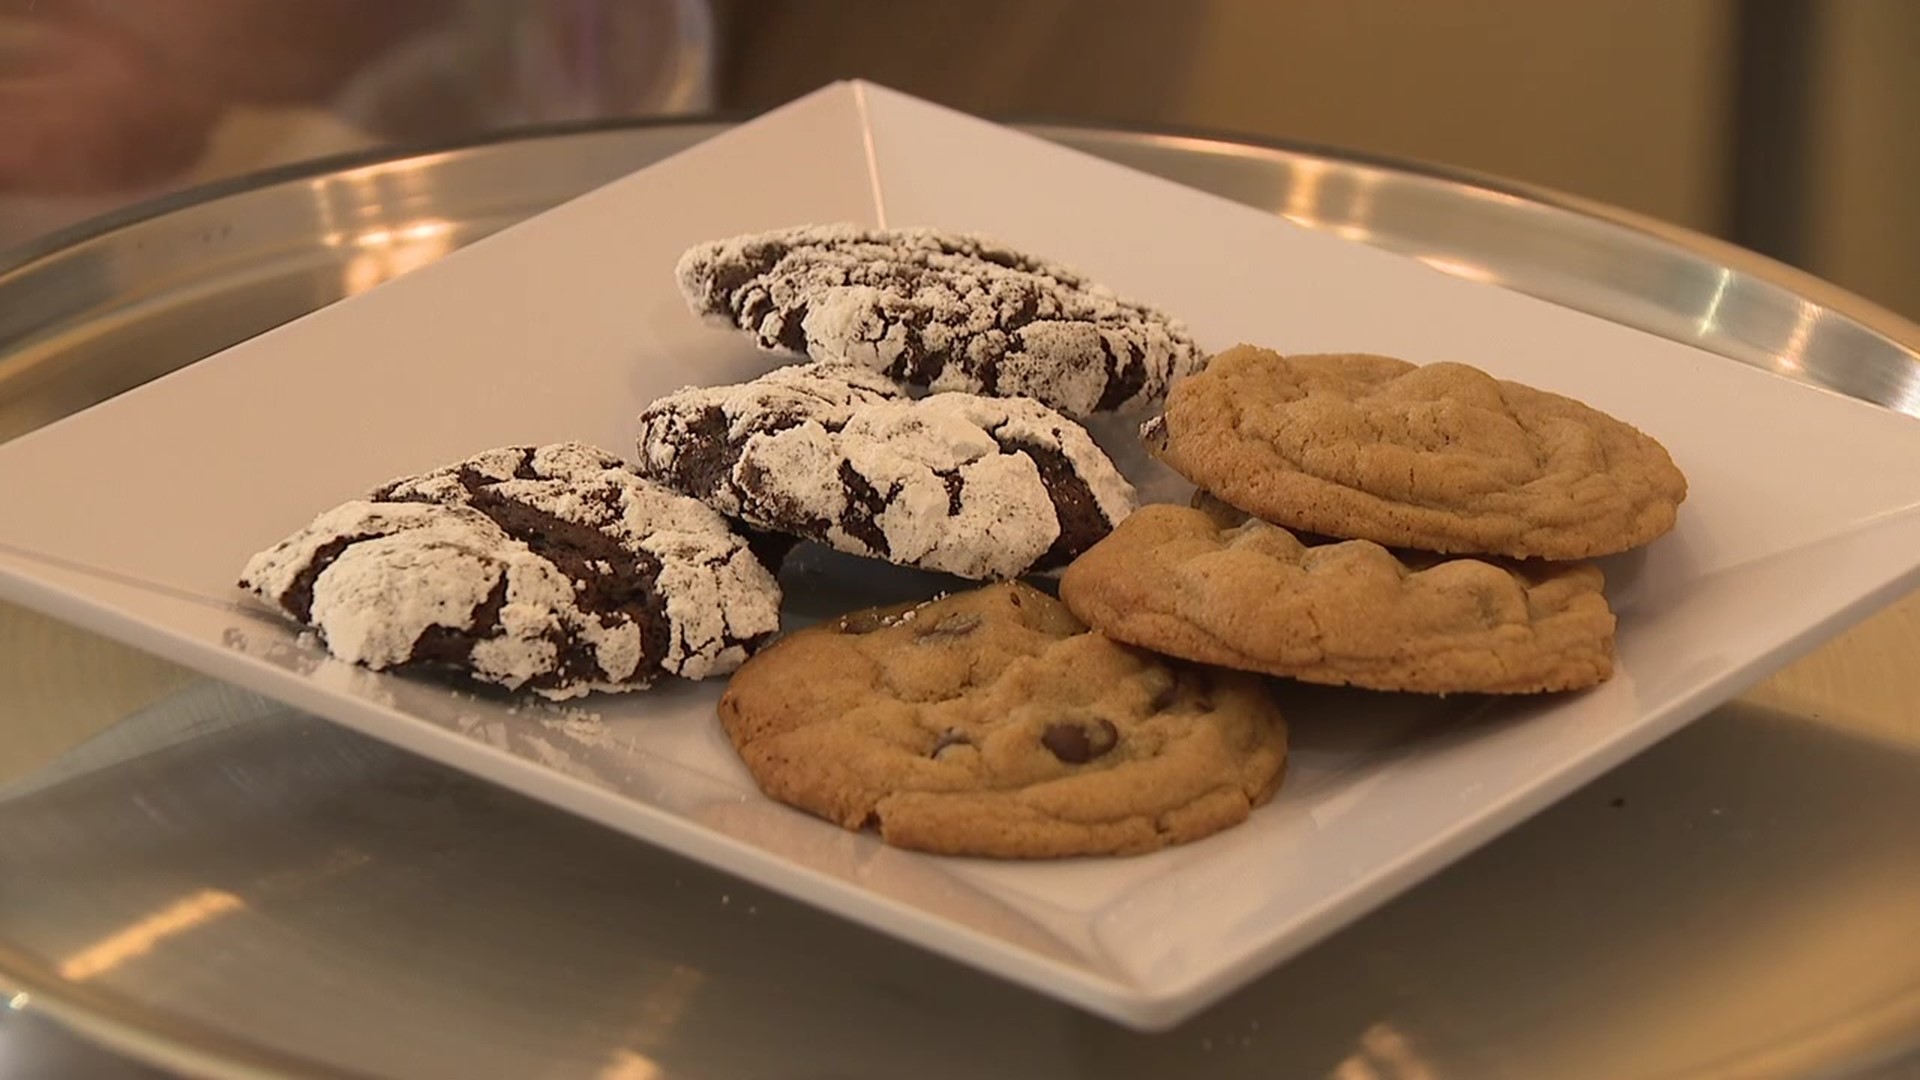 After running a mostly online cookie business for five years, "The Cookie Dude" opened a storefront in Lewisburg.